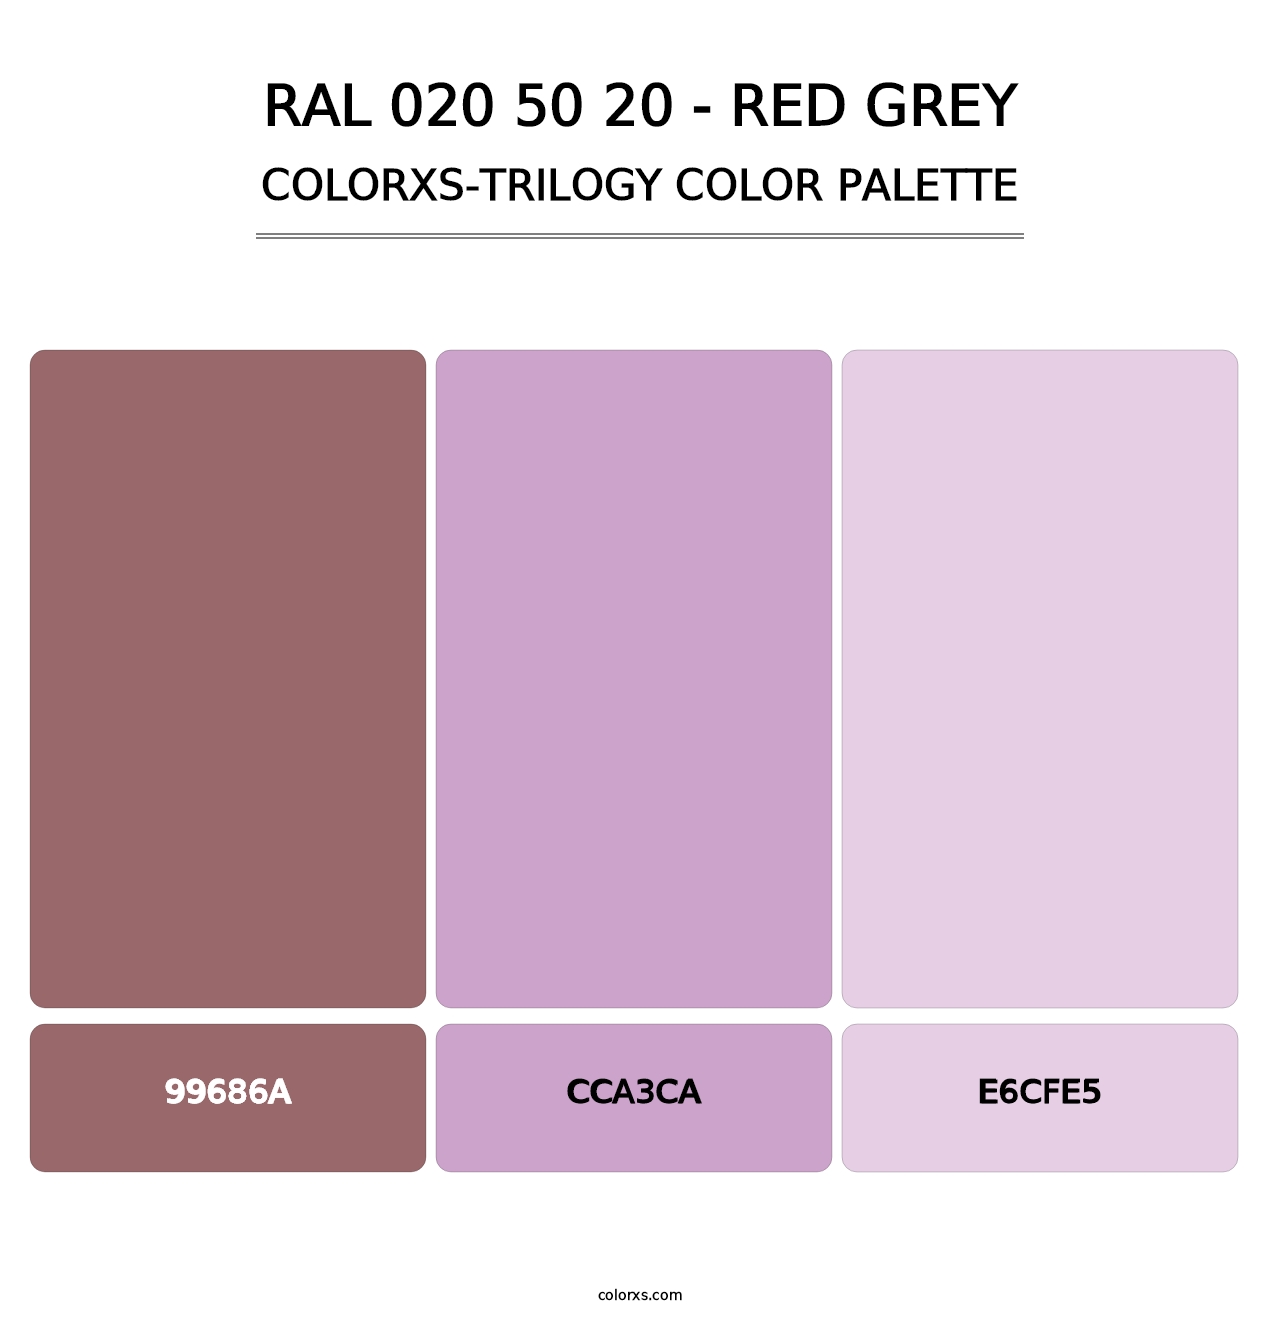 RAL 020 50 20 - Red Grey - Colorxs Trilogy Palette